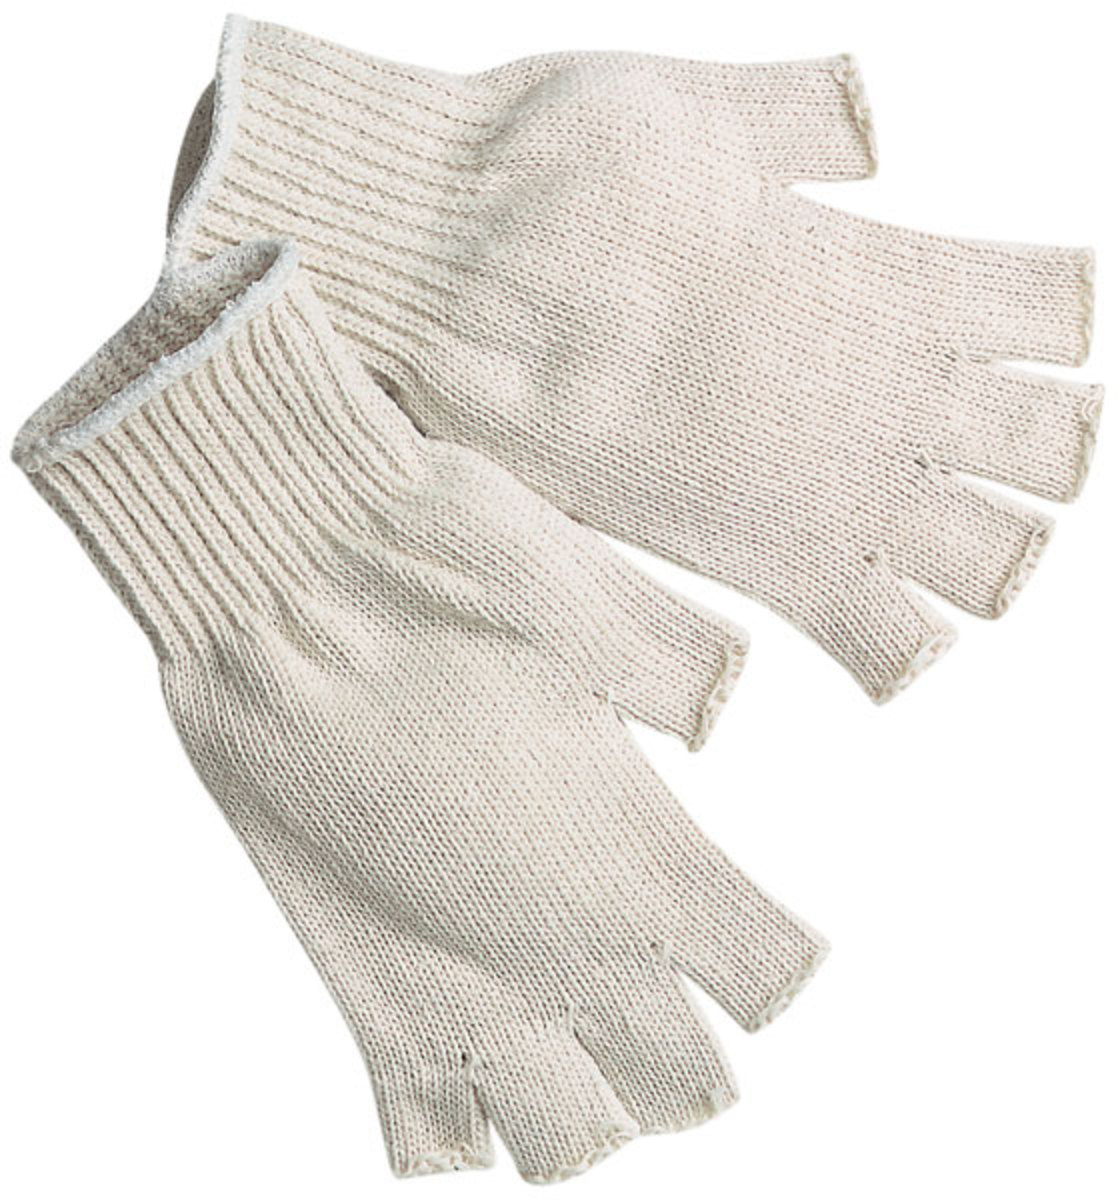 Memphis Glove Natural Small 7 Gauge Cotton And Polyester String Knit Fingerless Work Gloves With Knit Wrist